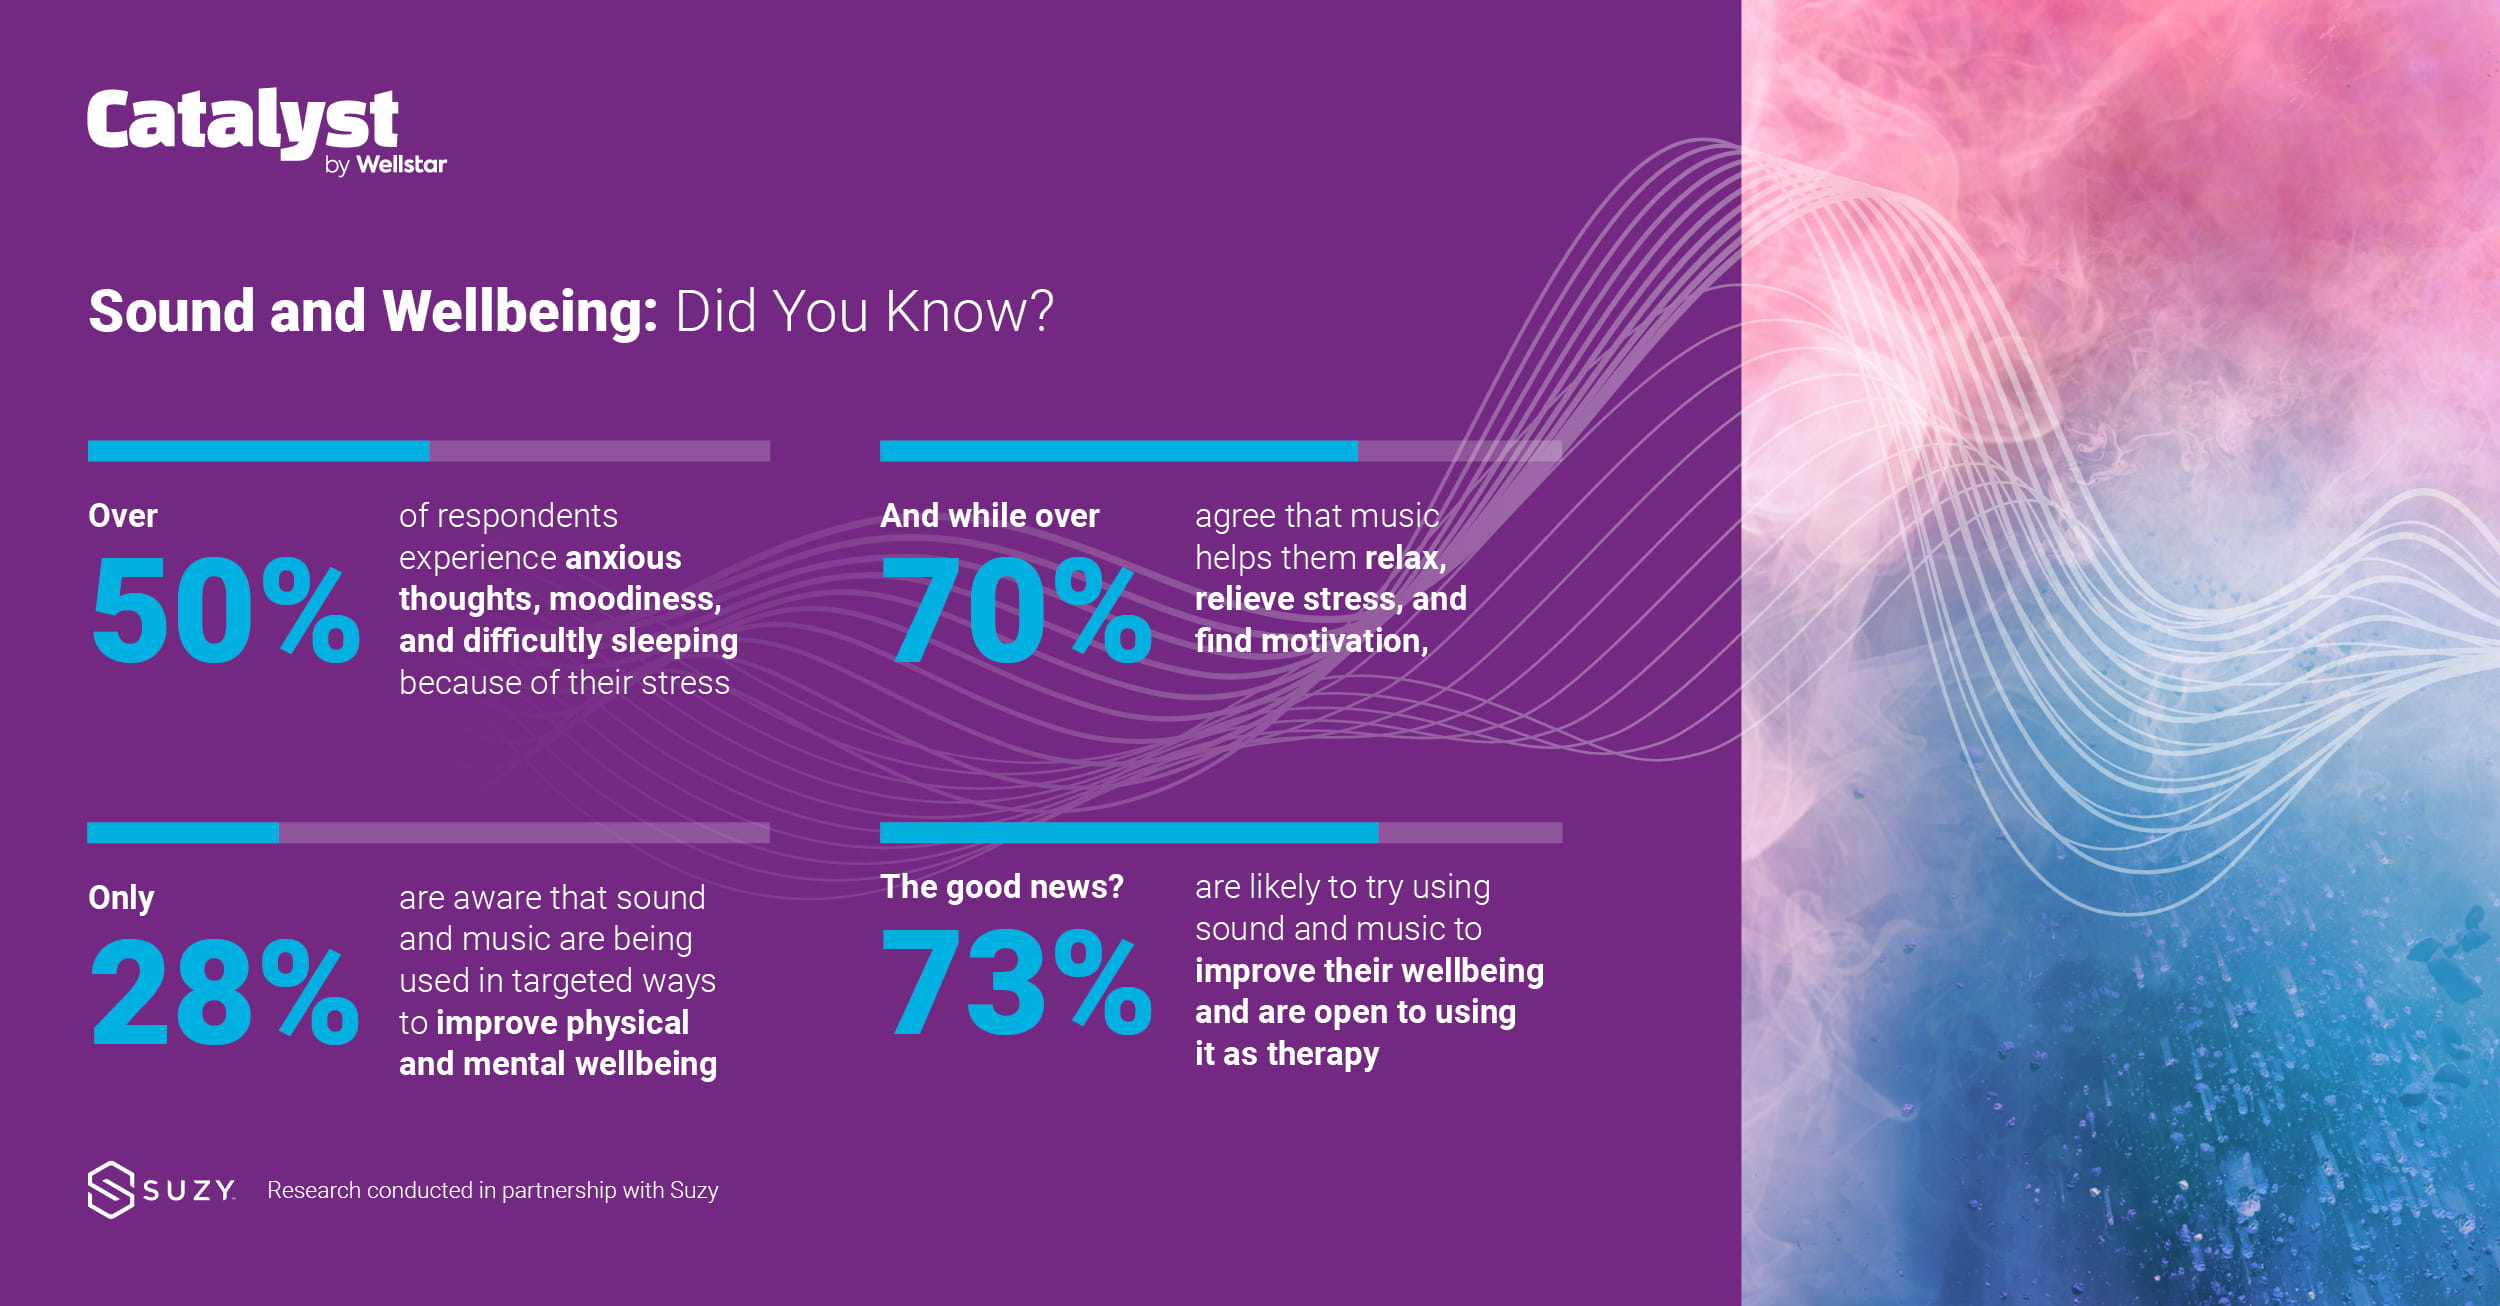 Infographic: Over 50% of respondents experience anxious thoughts, moodiness and difficulty sleeping because of their stress. And while over 70% agree that music helps them relax, relieve stress and find motivation, only 20% are aware that sound and music are being used in targeted ways to improve physical and mental well-being. The good news? 73% are likely to try using sound and music to improve their well-being and are open to using it as therapy.